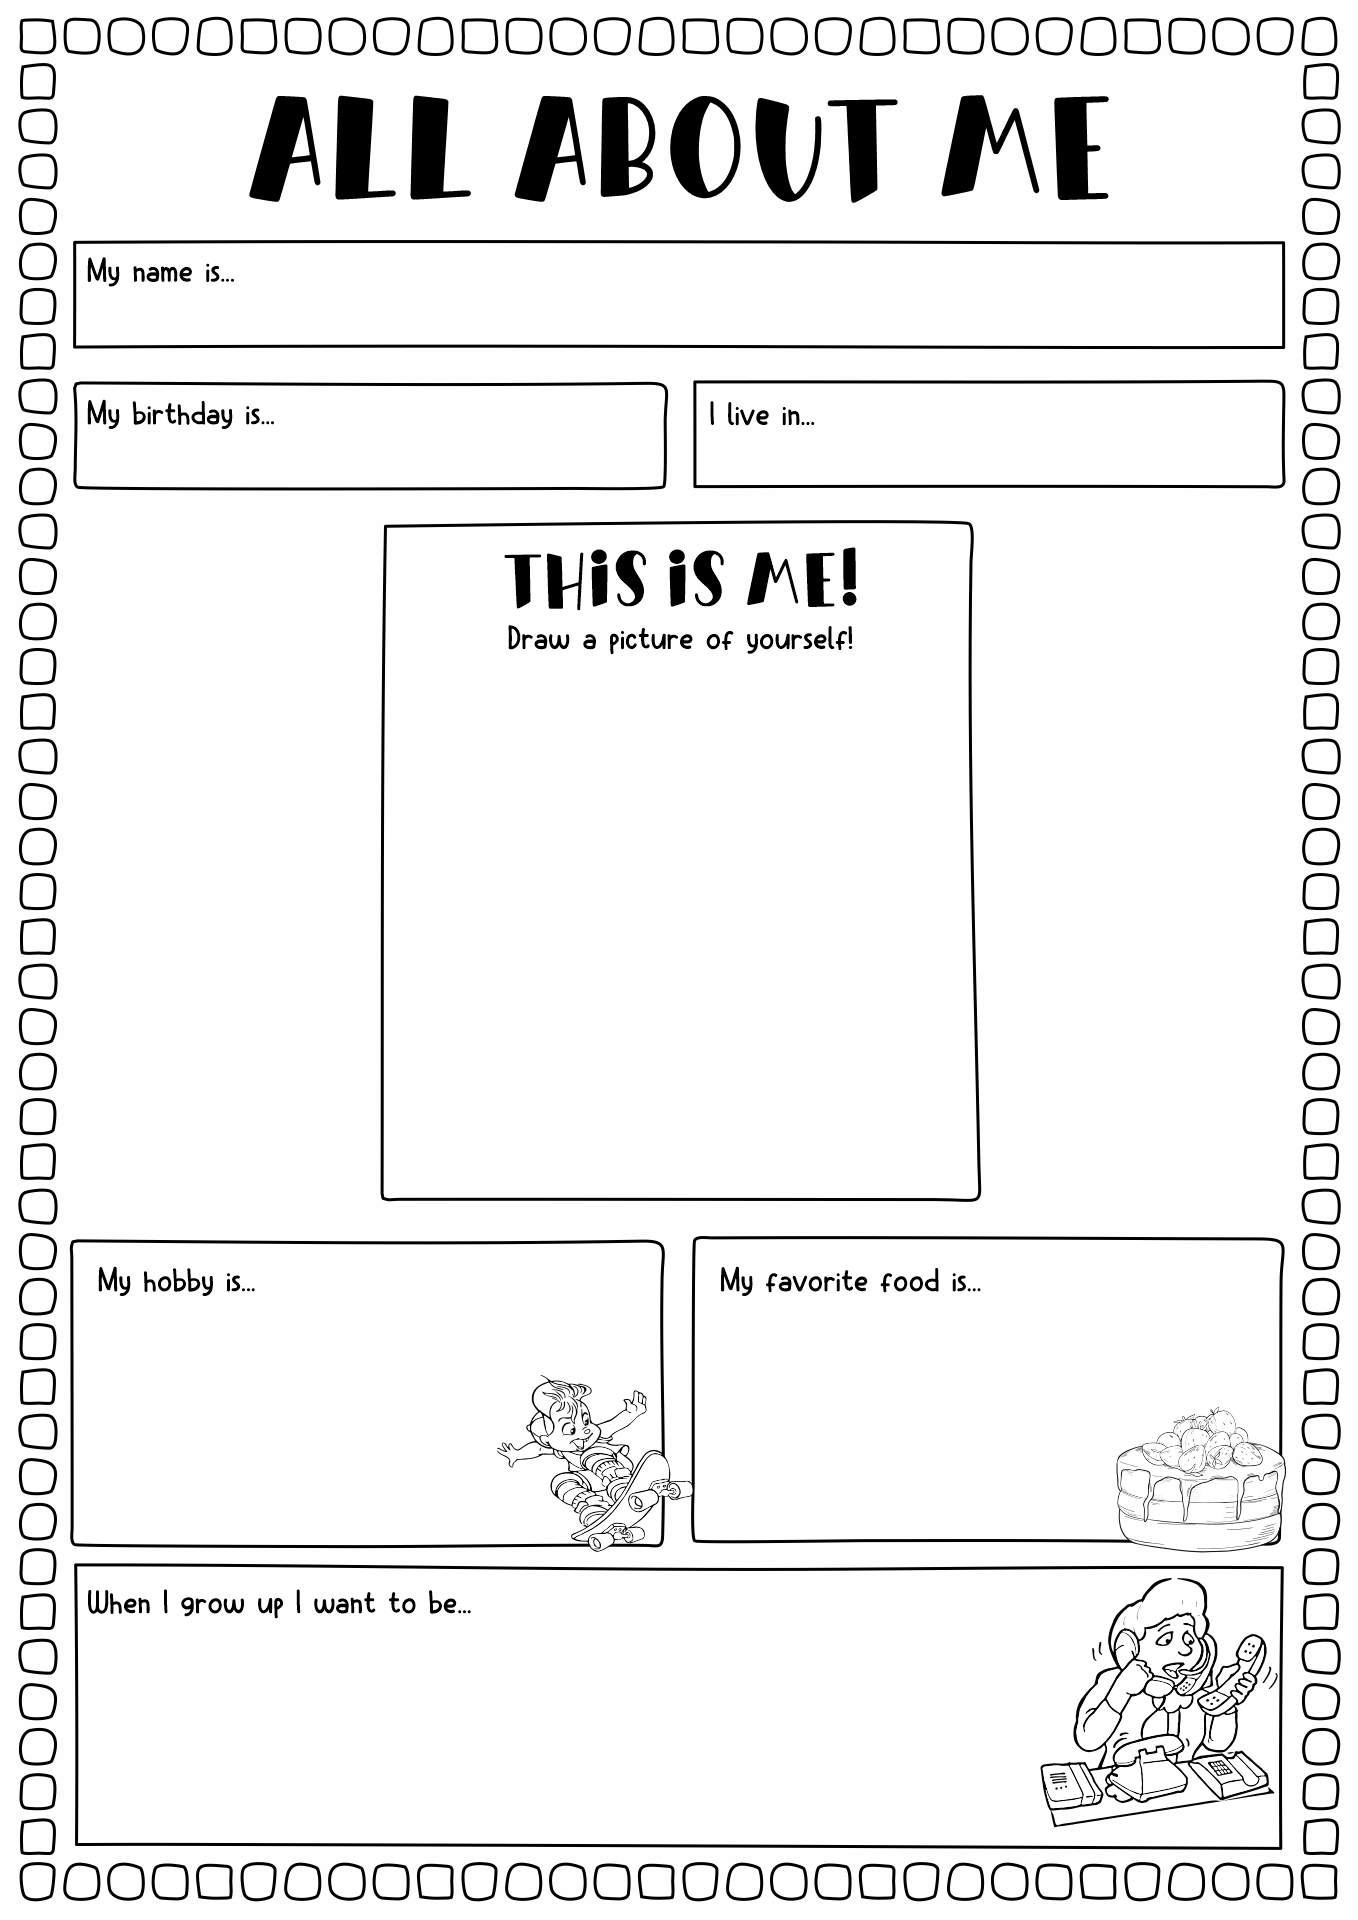 All About Me Second Grade Image